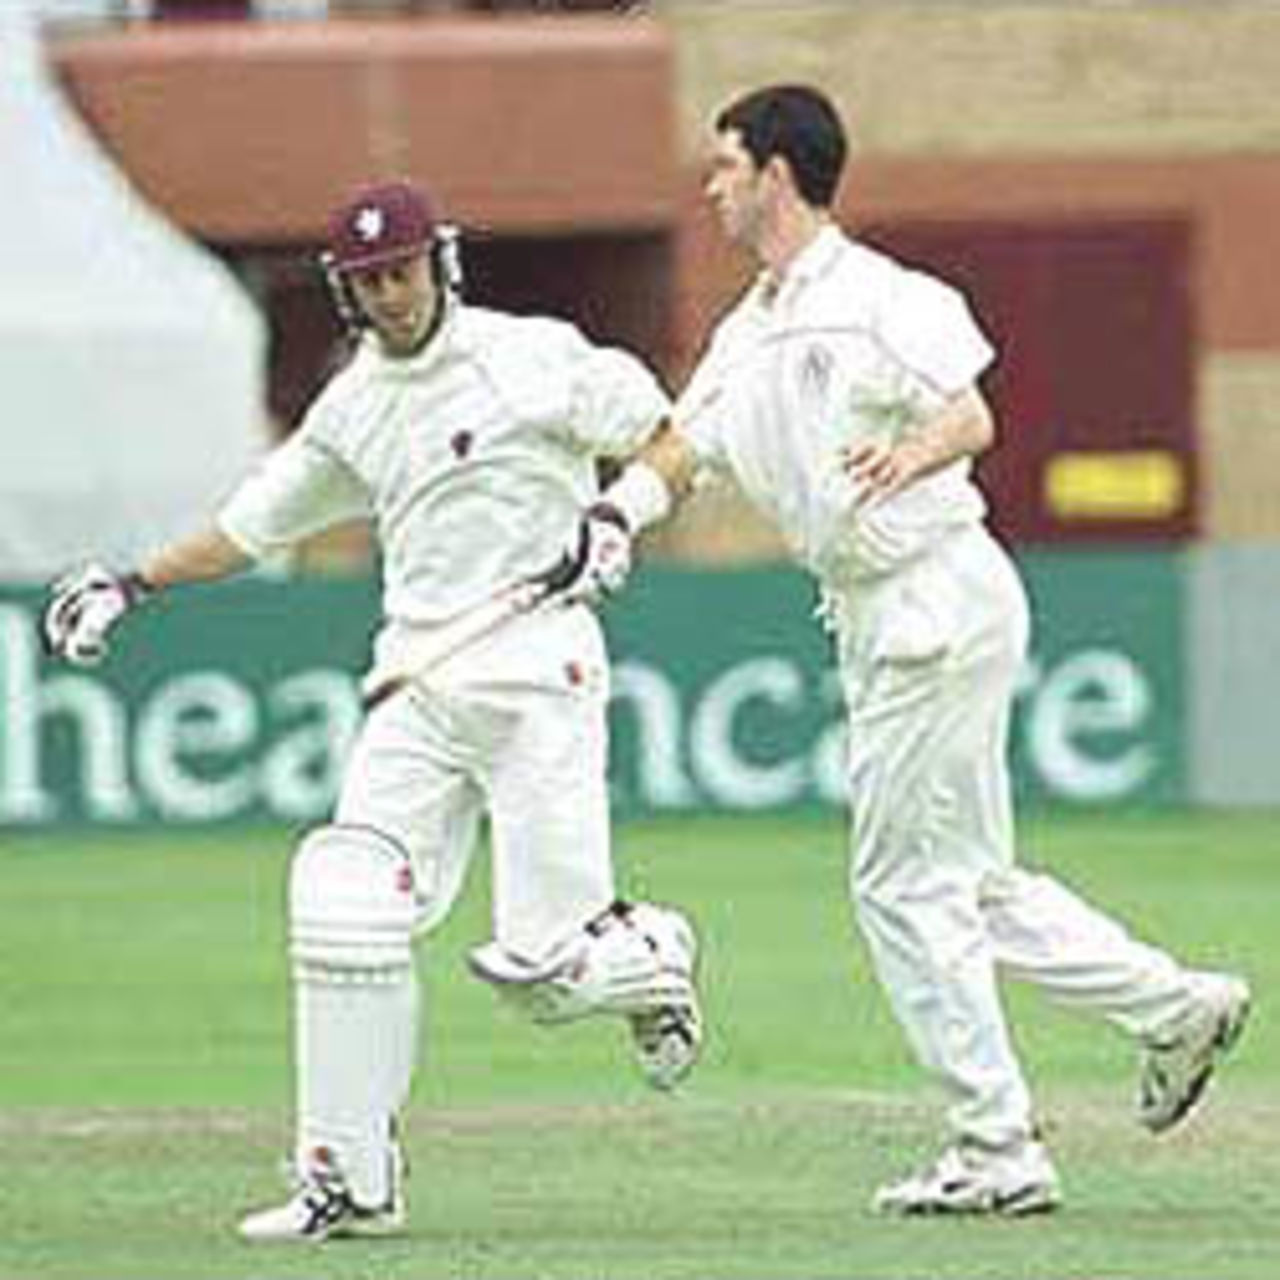 Mike Smethurst runs into Jamie Cox whilst trying to run him out, PPP healthcare County Championship Division One, 2000, Somerset v Lancashire, County Ground, Taunton, 12-15 July 2000(Day 2).